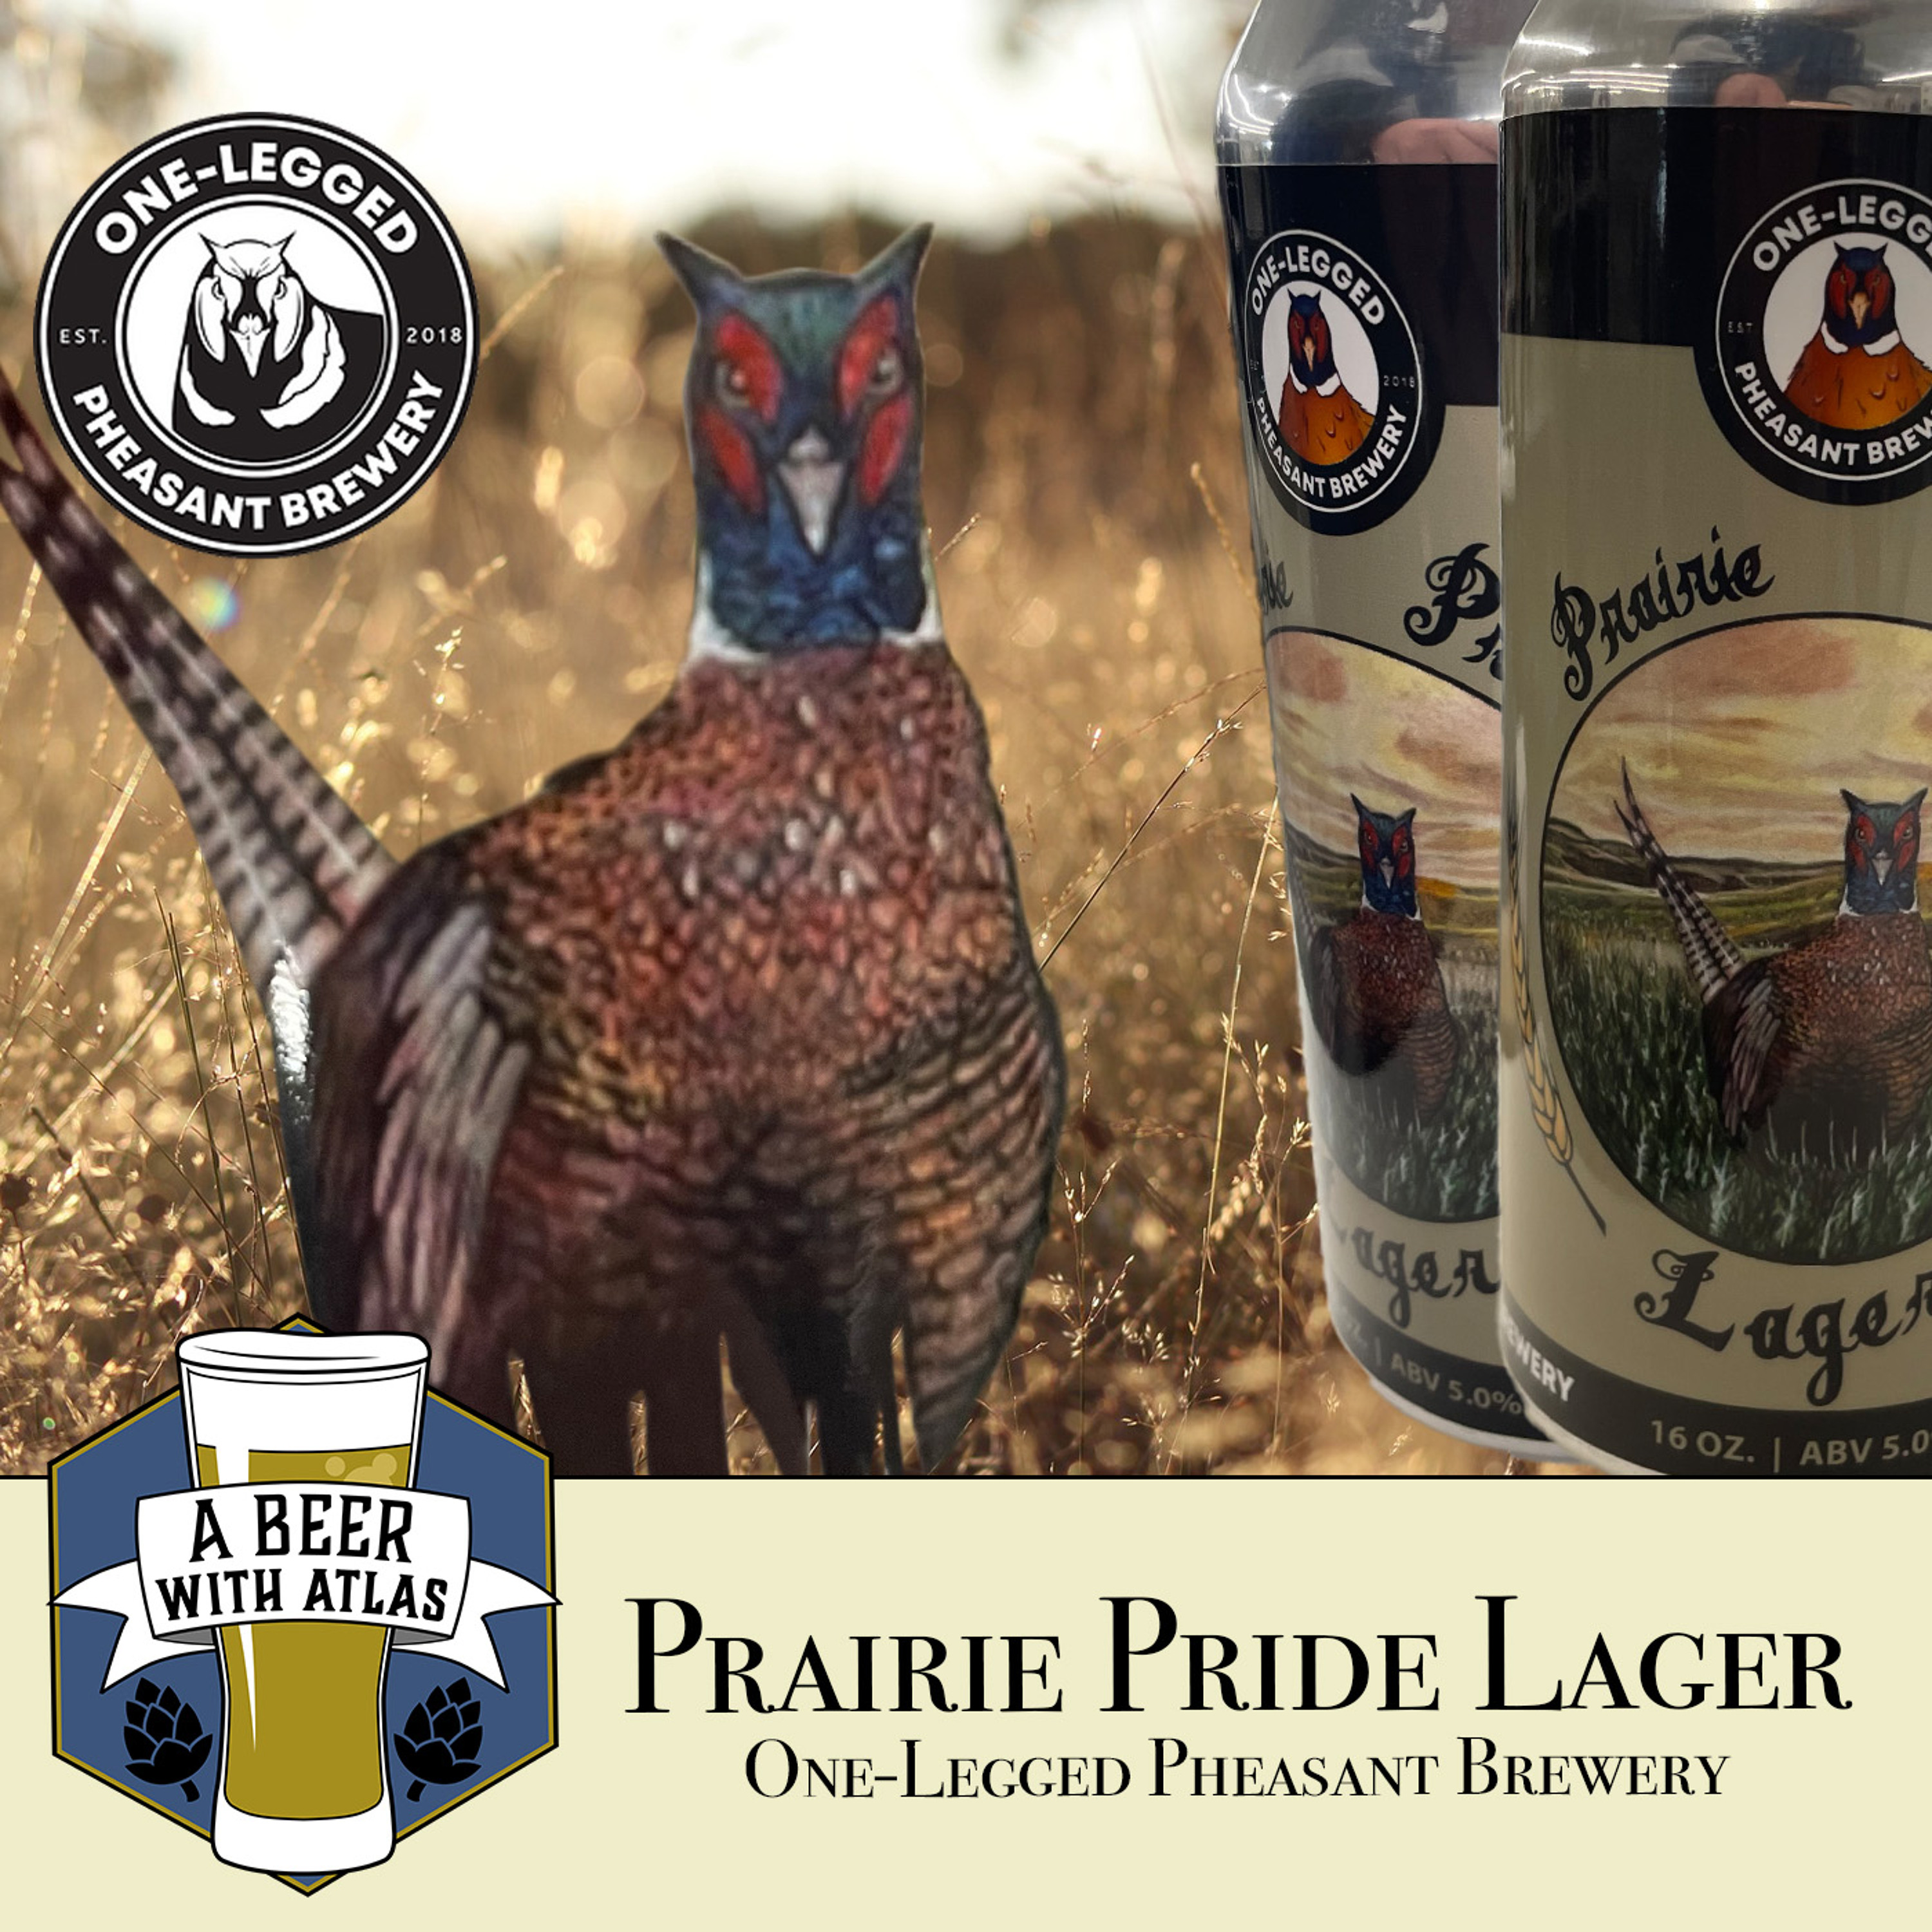 Prairie Pride Lager by One-Legged Pheasant Brewery - A Beer with Atlas 222